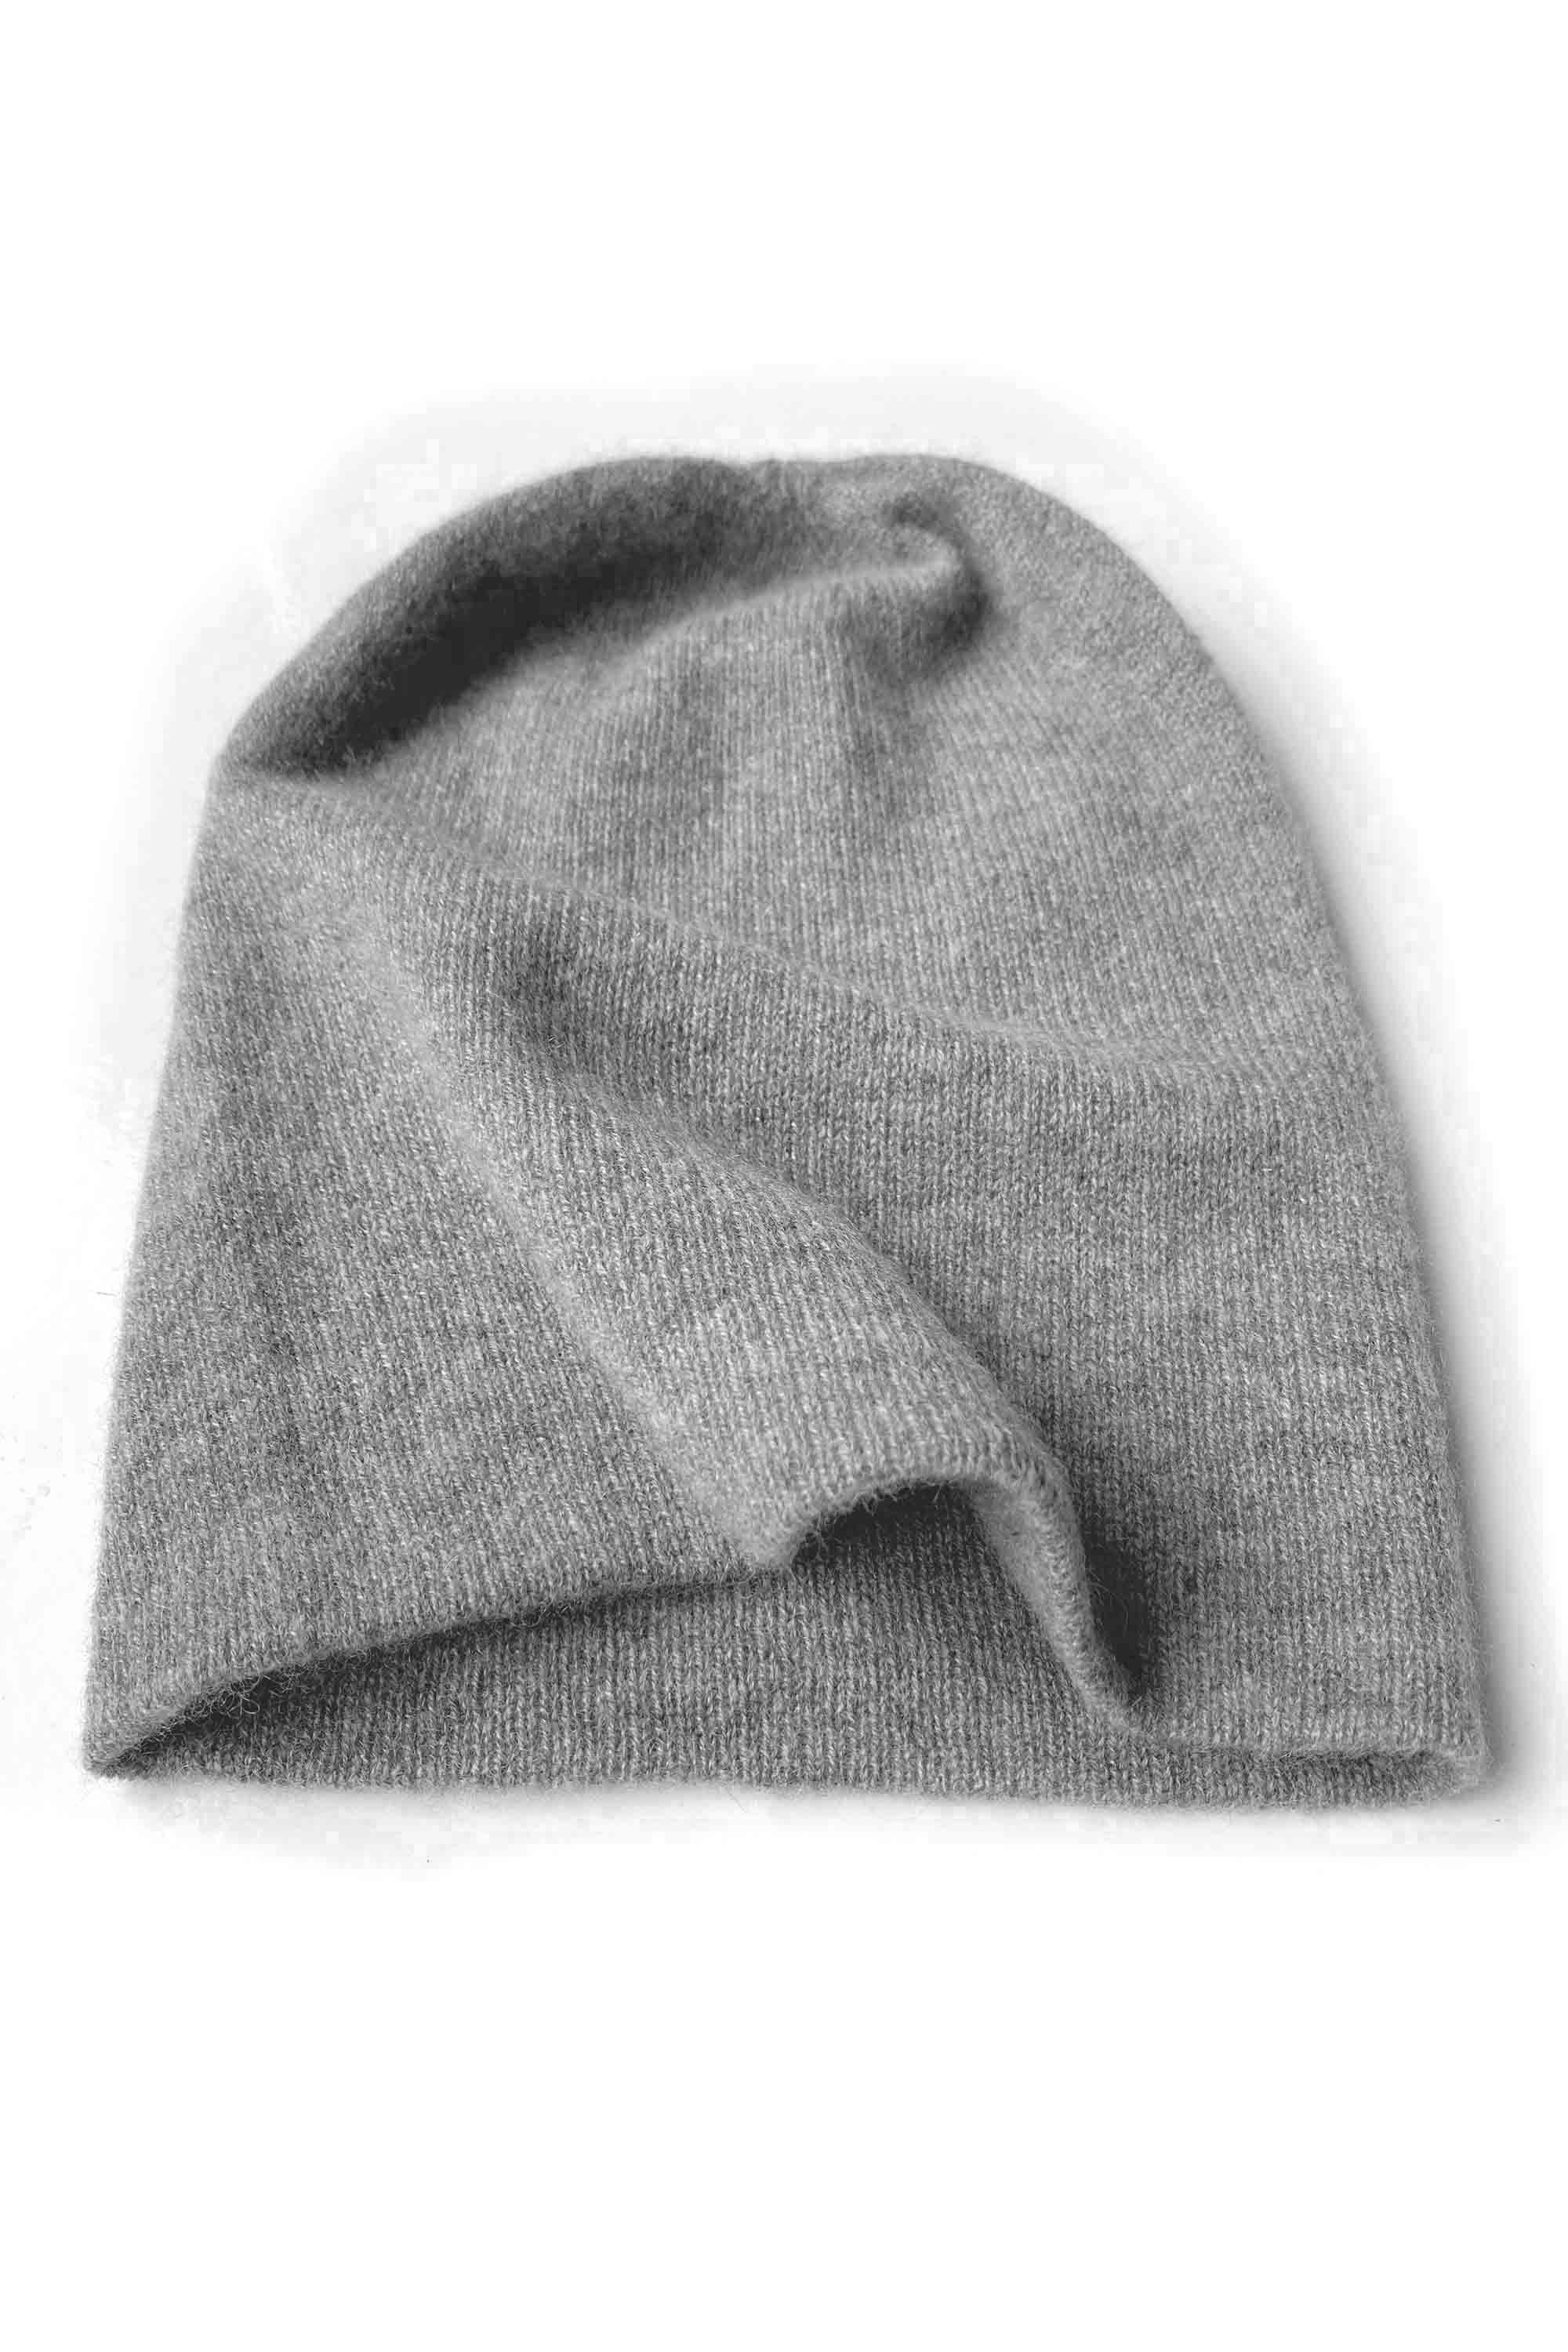 Birthday Cashmere Knitted or for - Beanie Slouchy Men for Grey, Winter in Him and in Perfect Etsy Her Mid Gray Hat Gift Women,